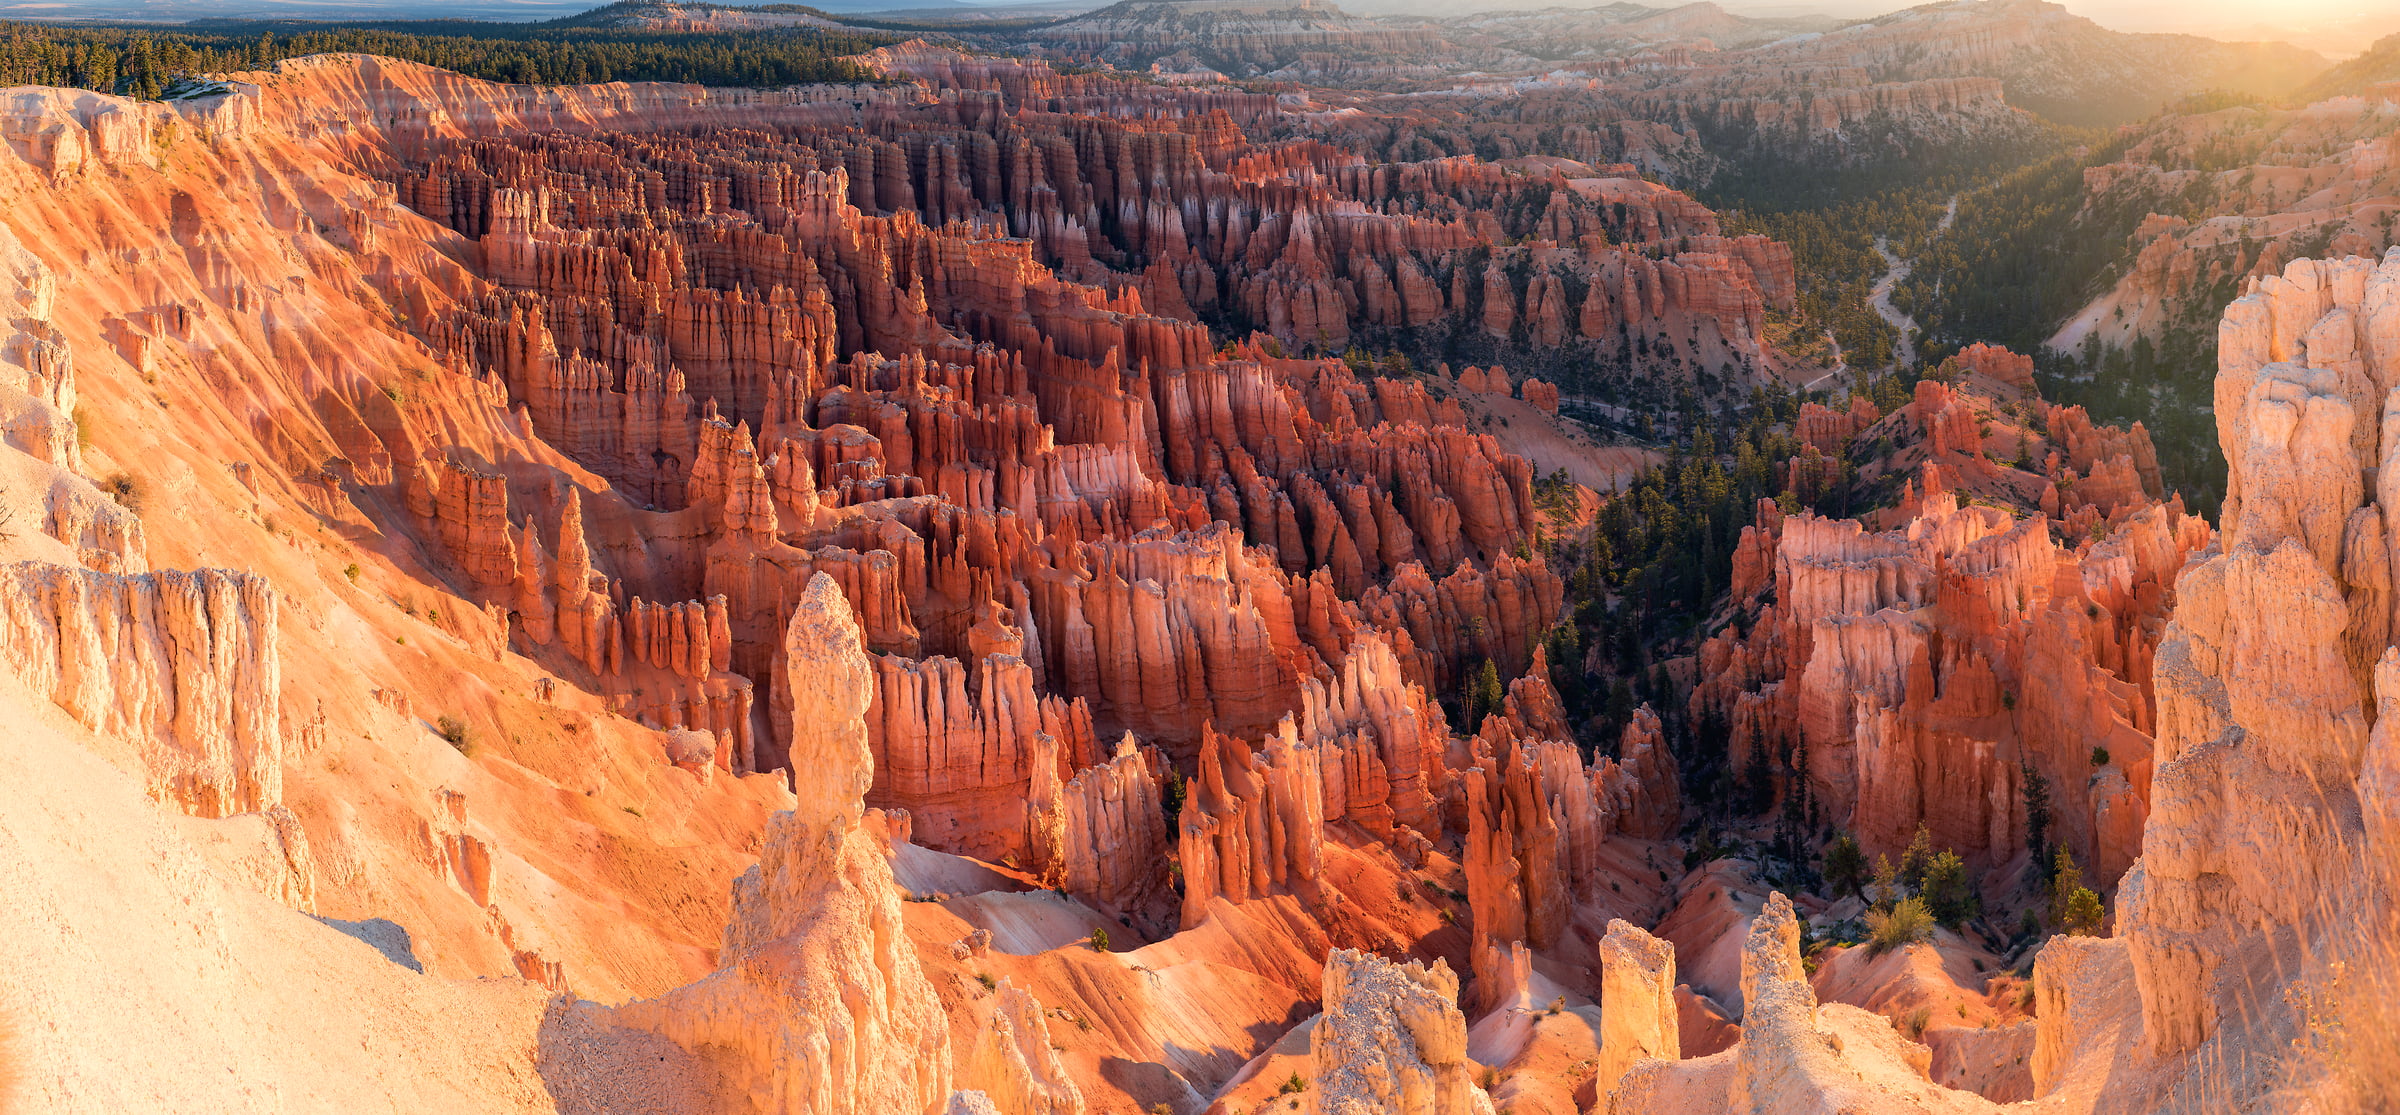 547 megapixels! A very high resolution, large-format VAST photo print of geological formations; landscape photograph created by Jim Tarpo in Bryce Canyon, Utah.